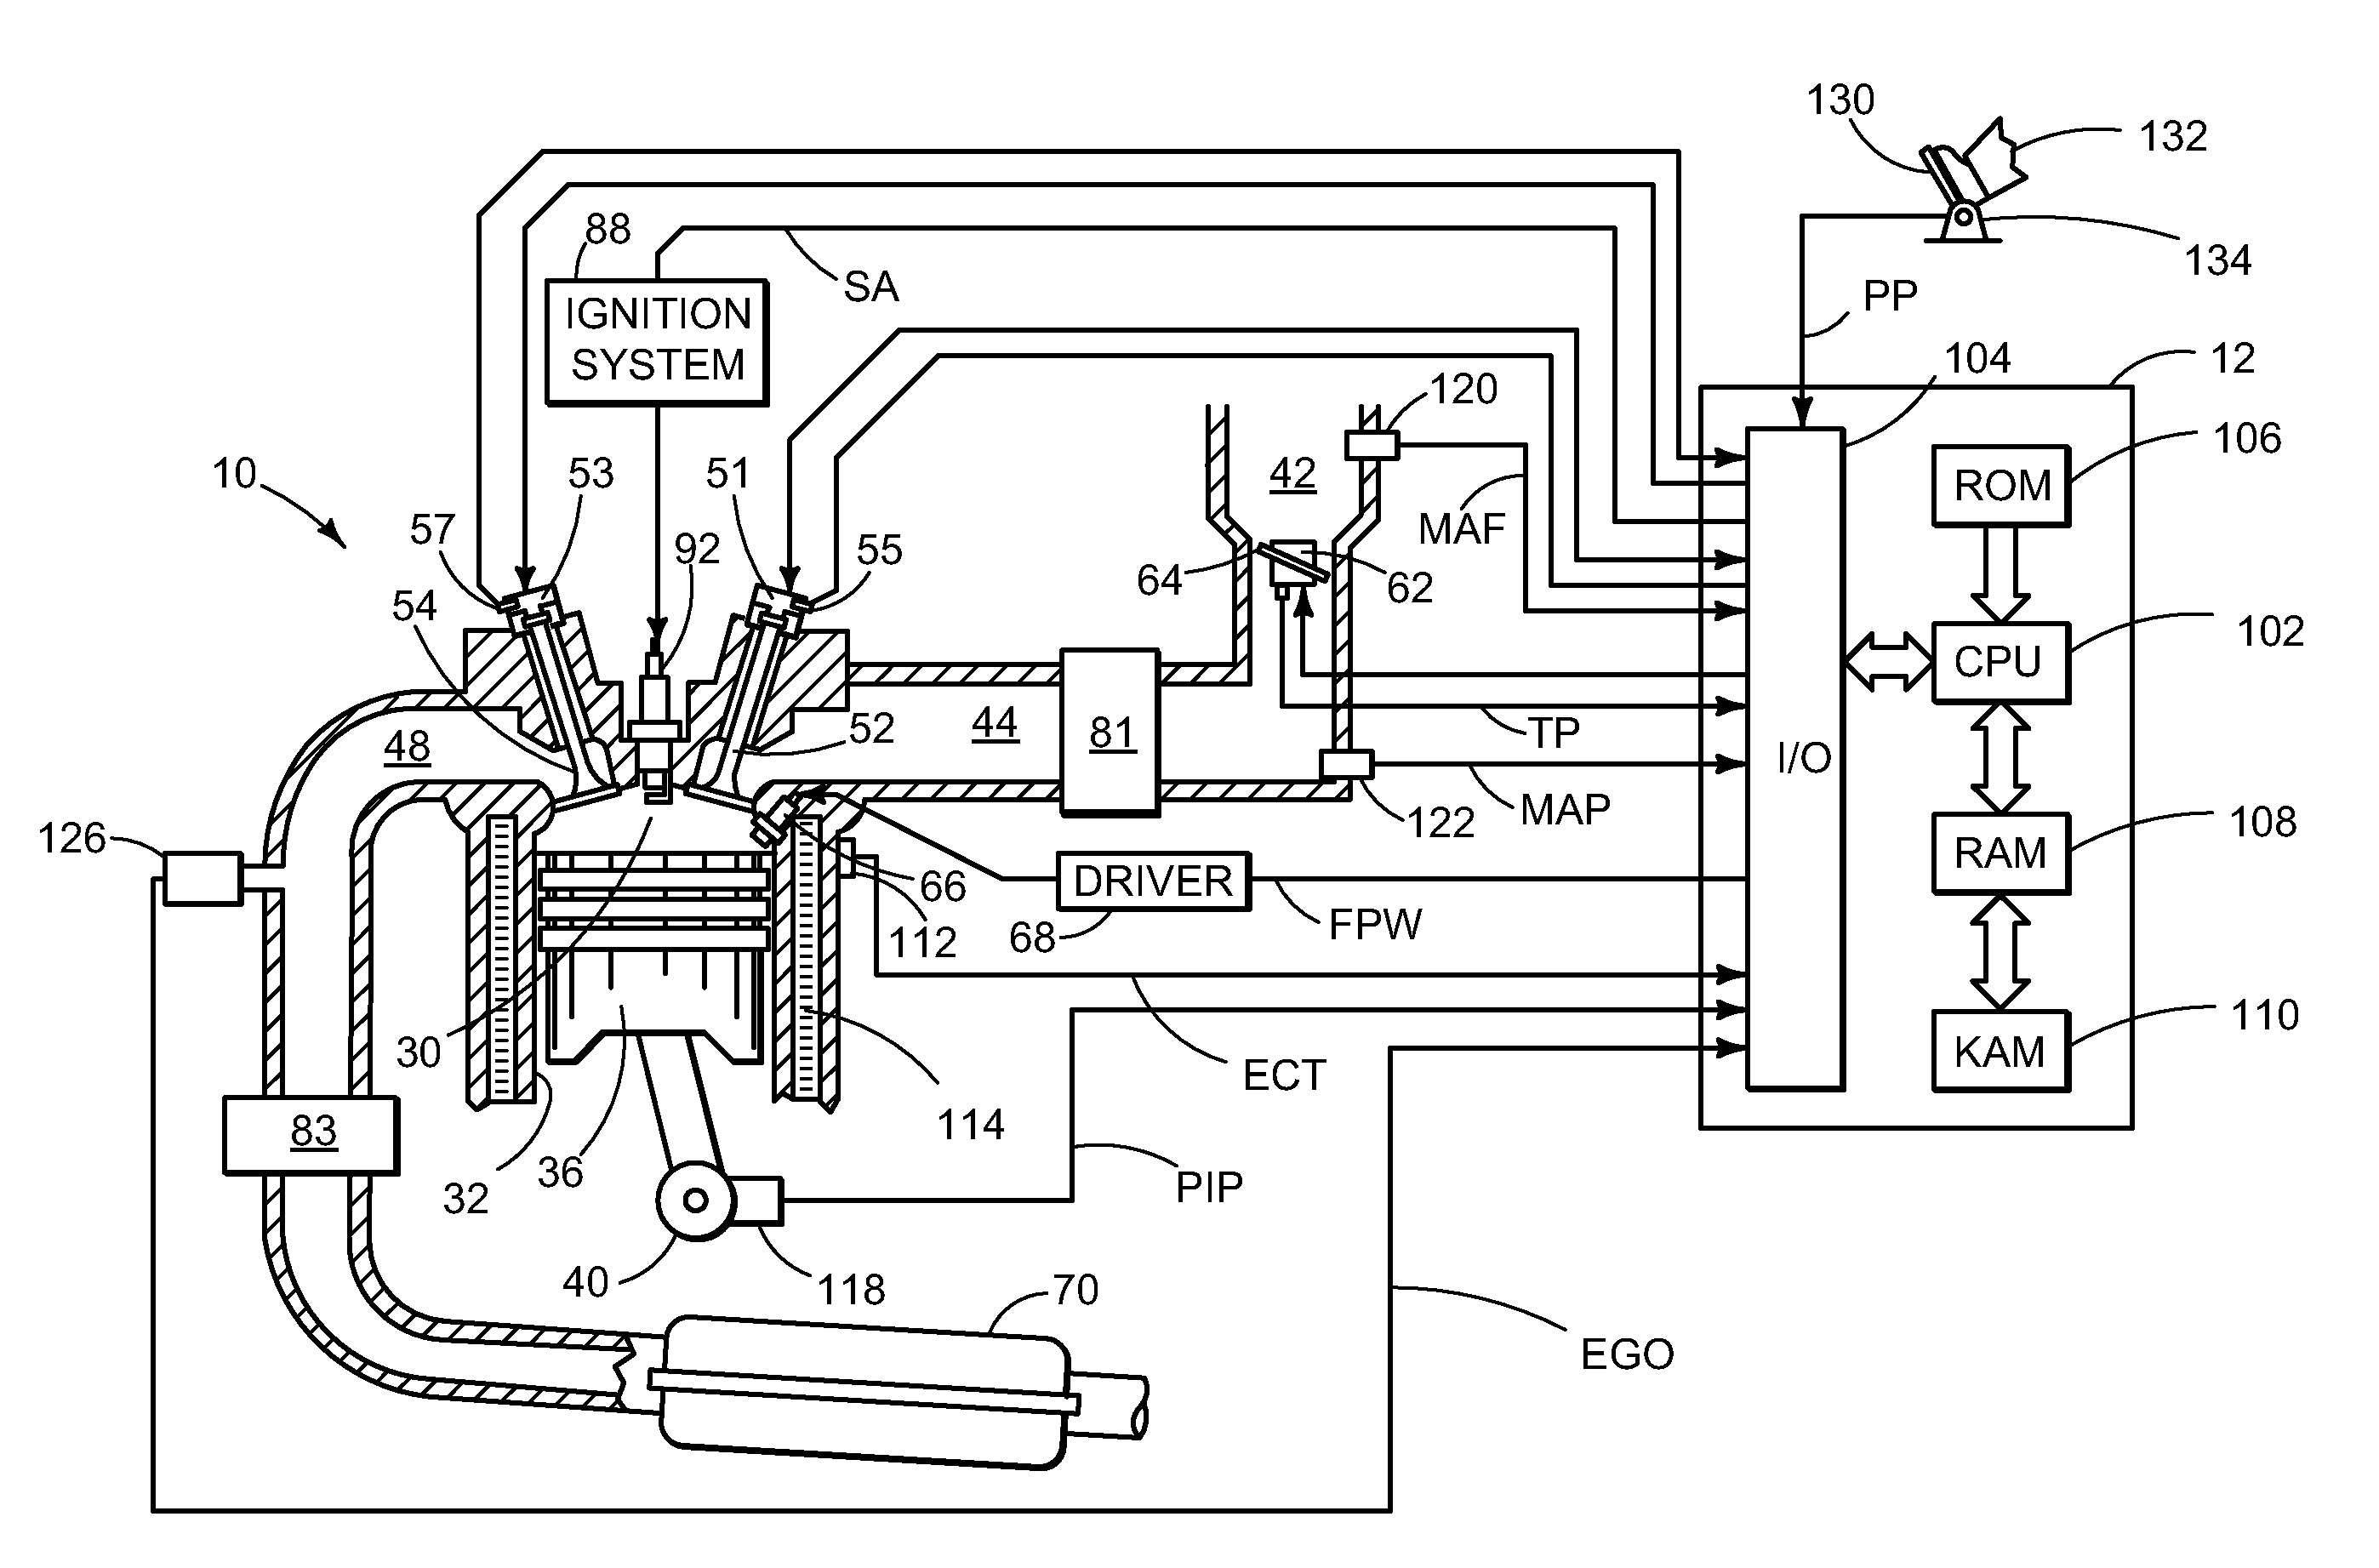 Differential Torque Operation for Internal Combustion Engine